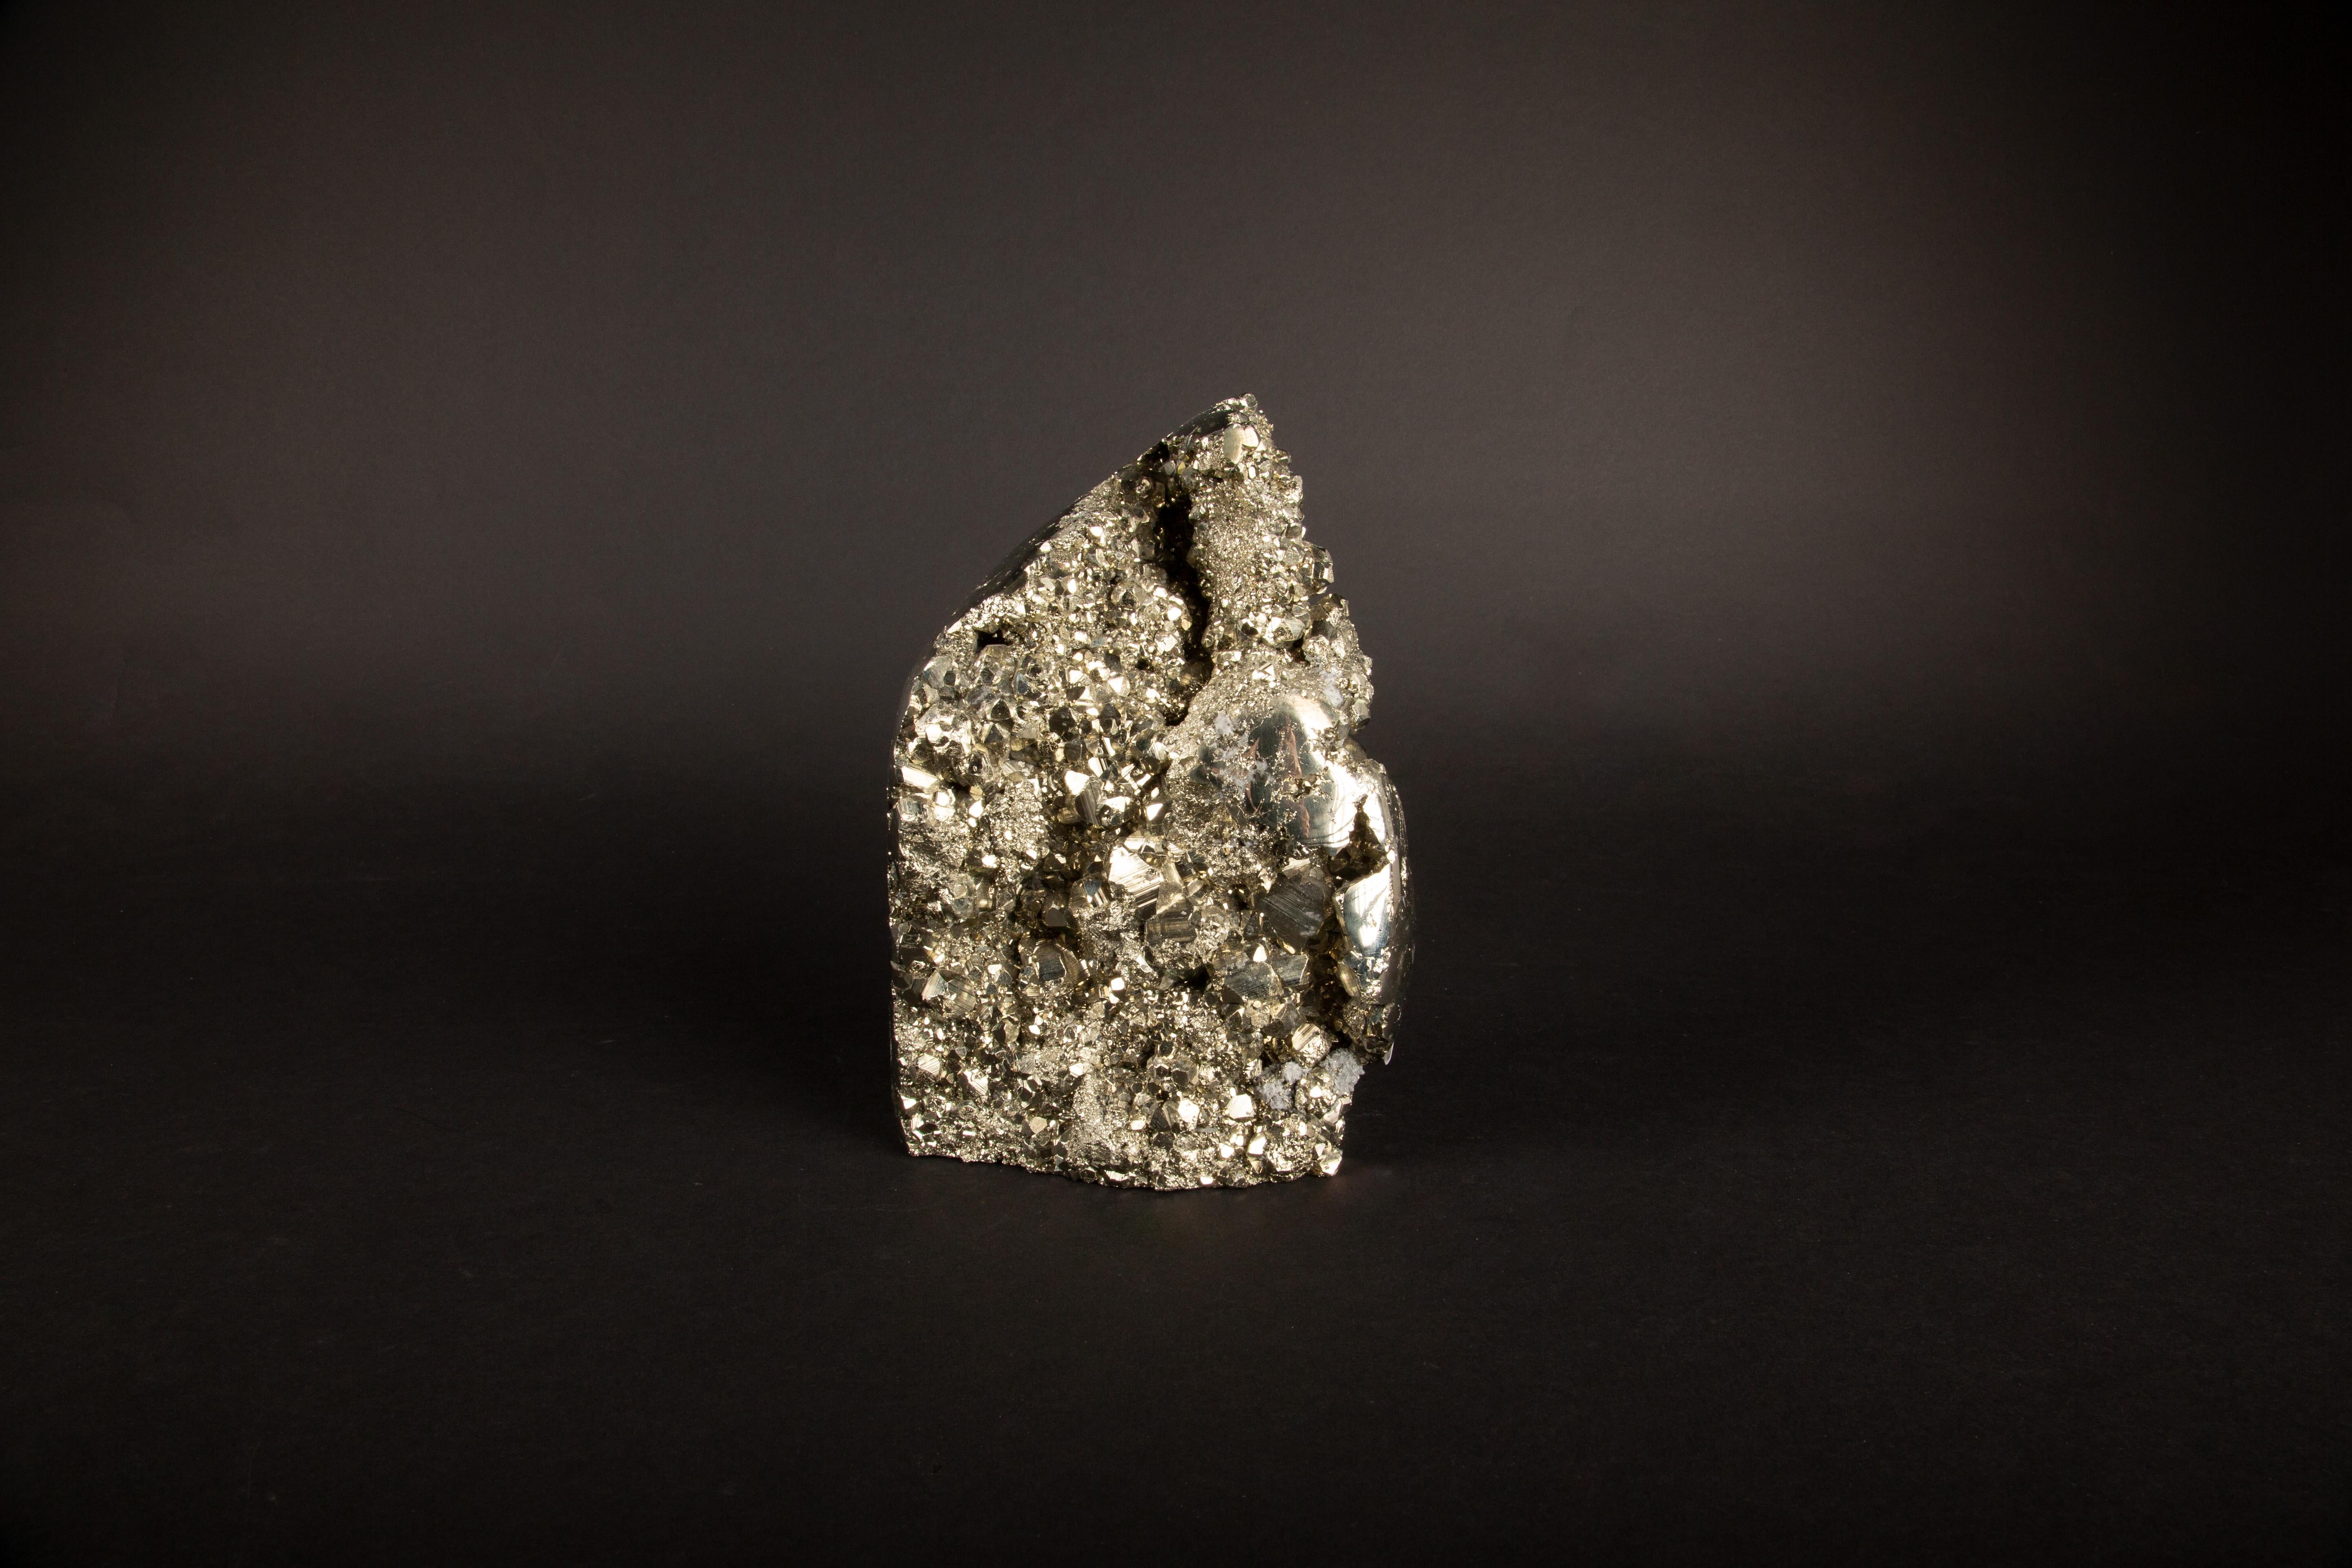 This large Pyrite Specimen stands at an impressive 8.25 inches in height, presenting a magnificent display of nature's artistry. Renowned for its metallic luster and golden hue, pyrite—often called 